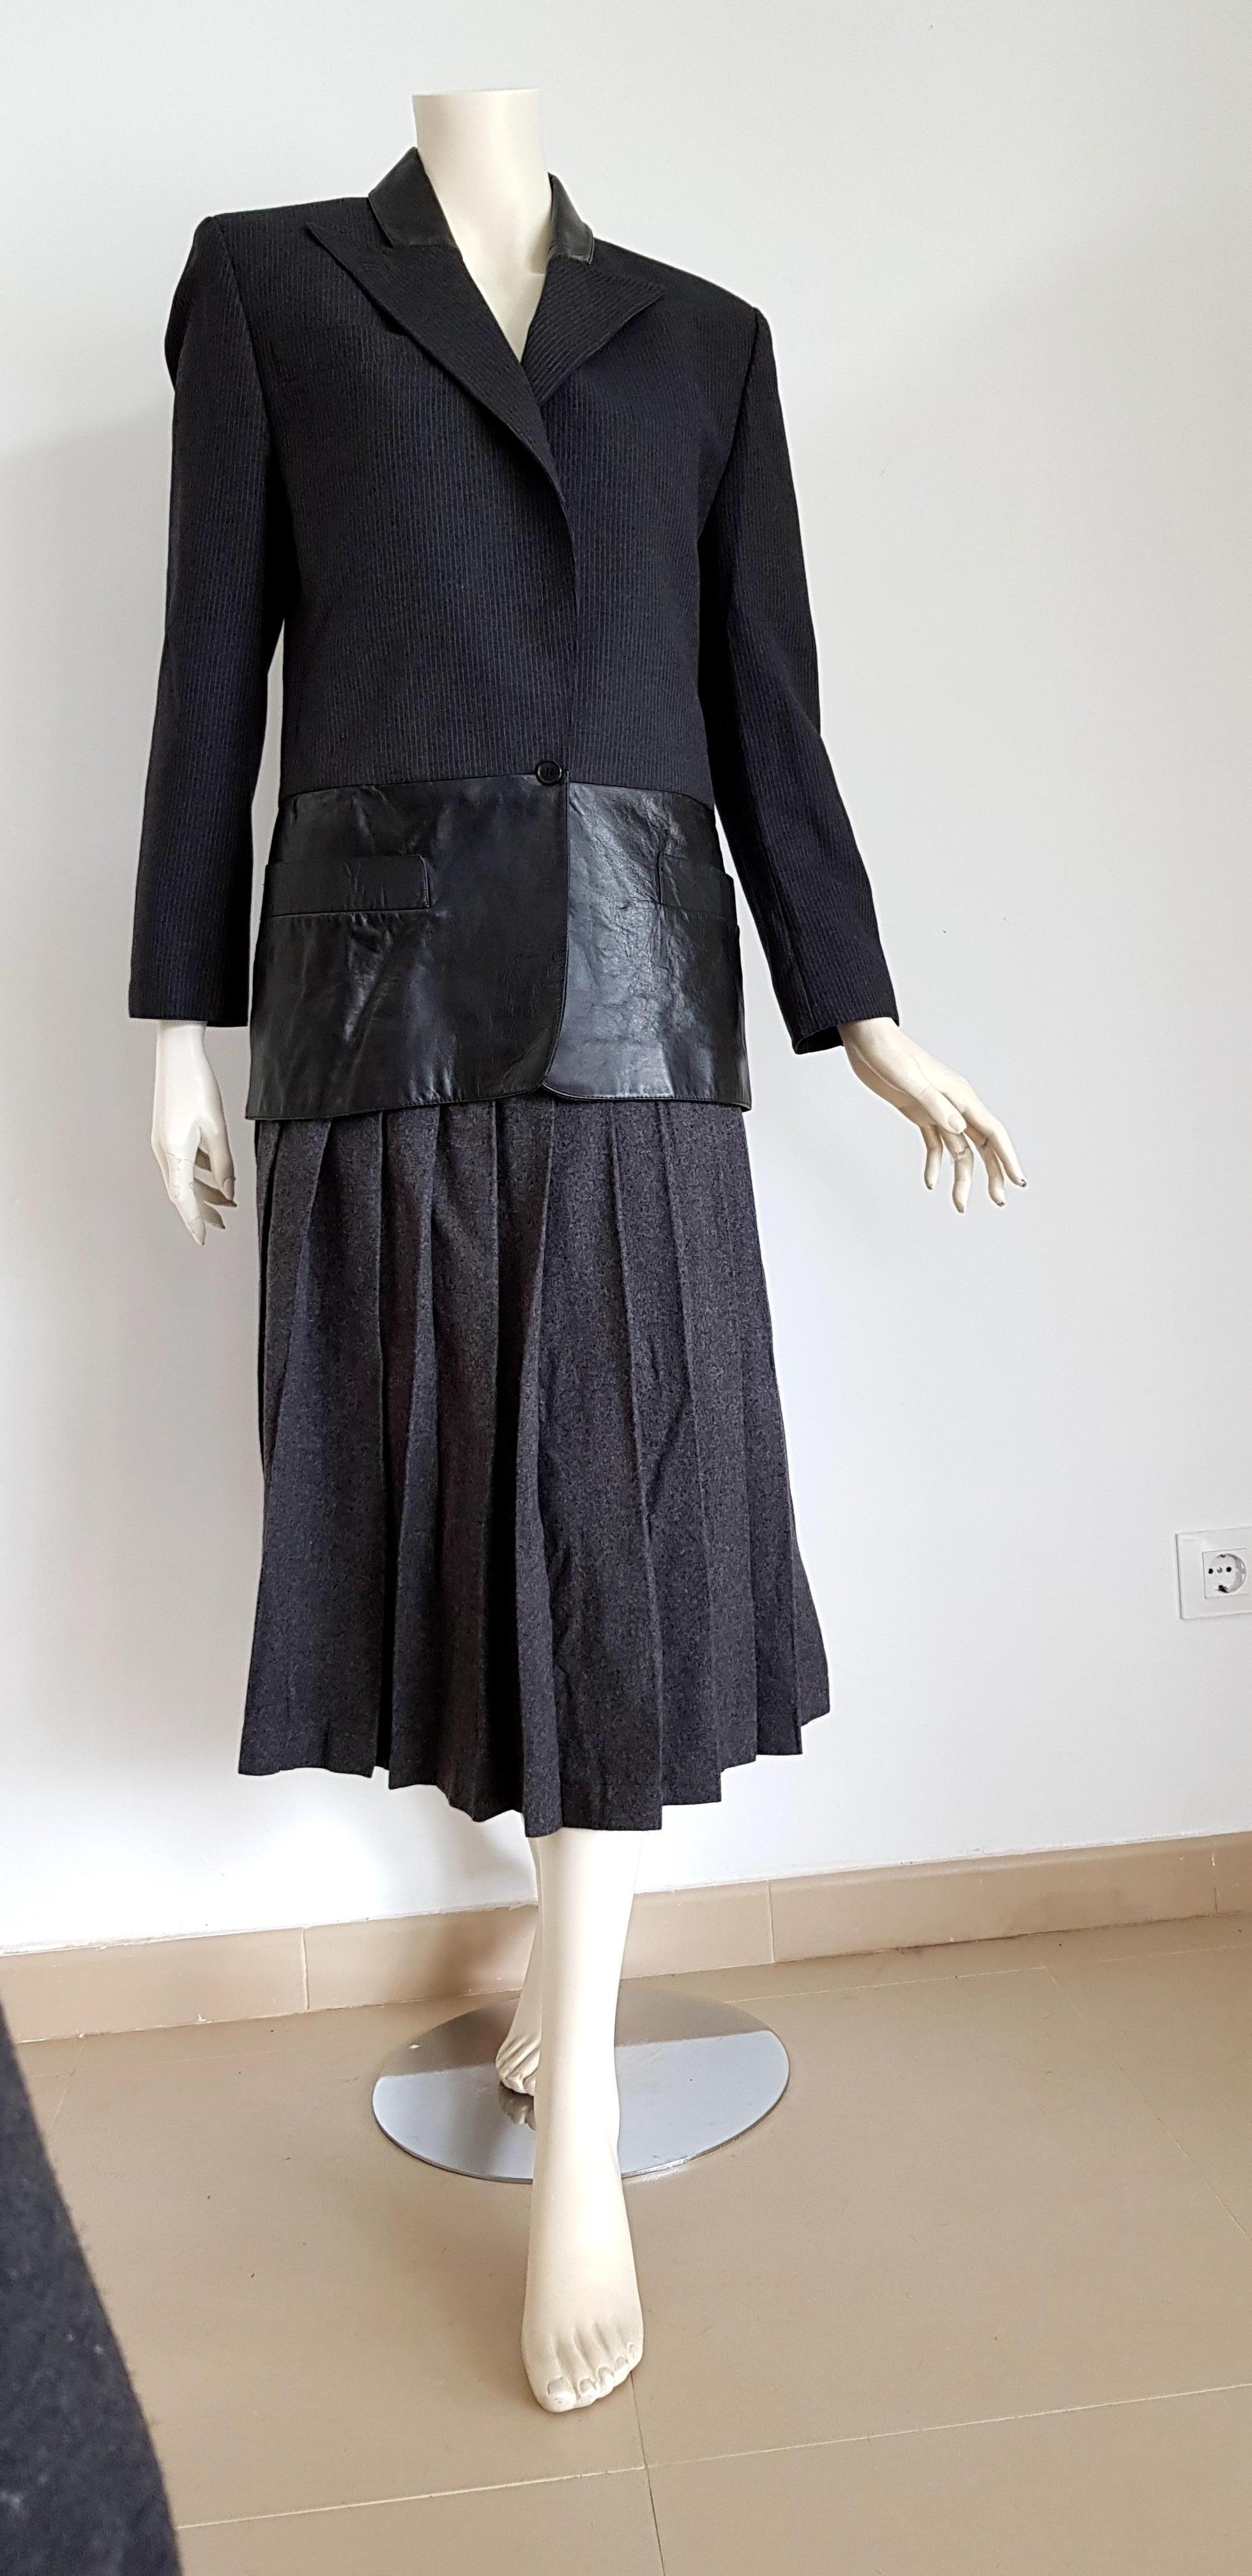 Claude MONTANA  wool and leather dark grey, jacket with light lines, skirt suit - Unworn, New.
..
SIZE: equivalent to about Small / Medium, please review approx measurements as follows in cm. 
JACKET: lenght 75, chest underarm to underarm 55, bust